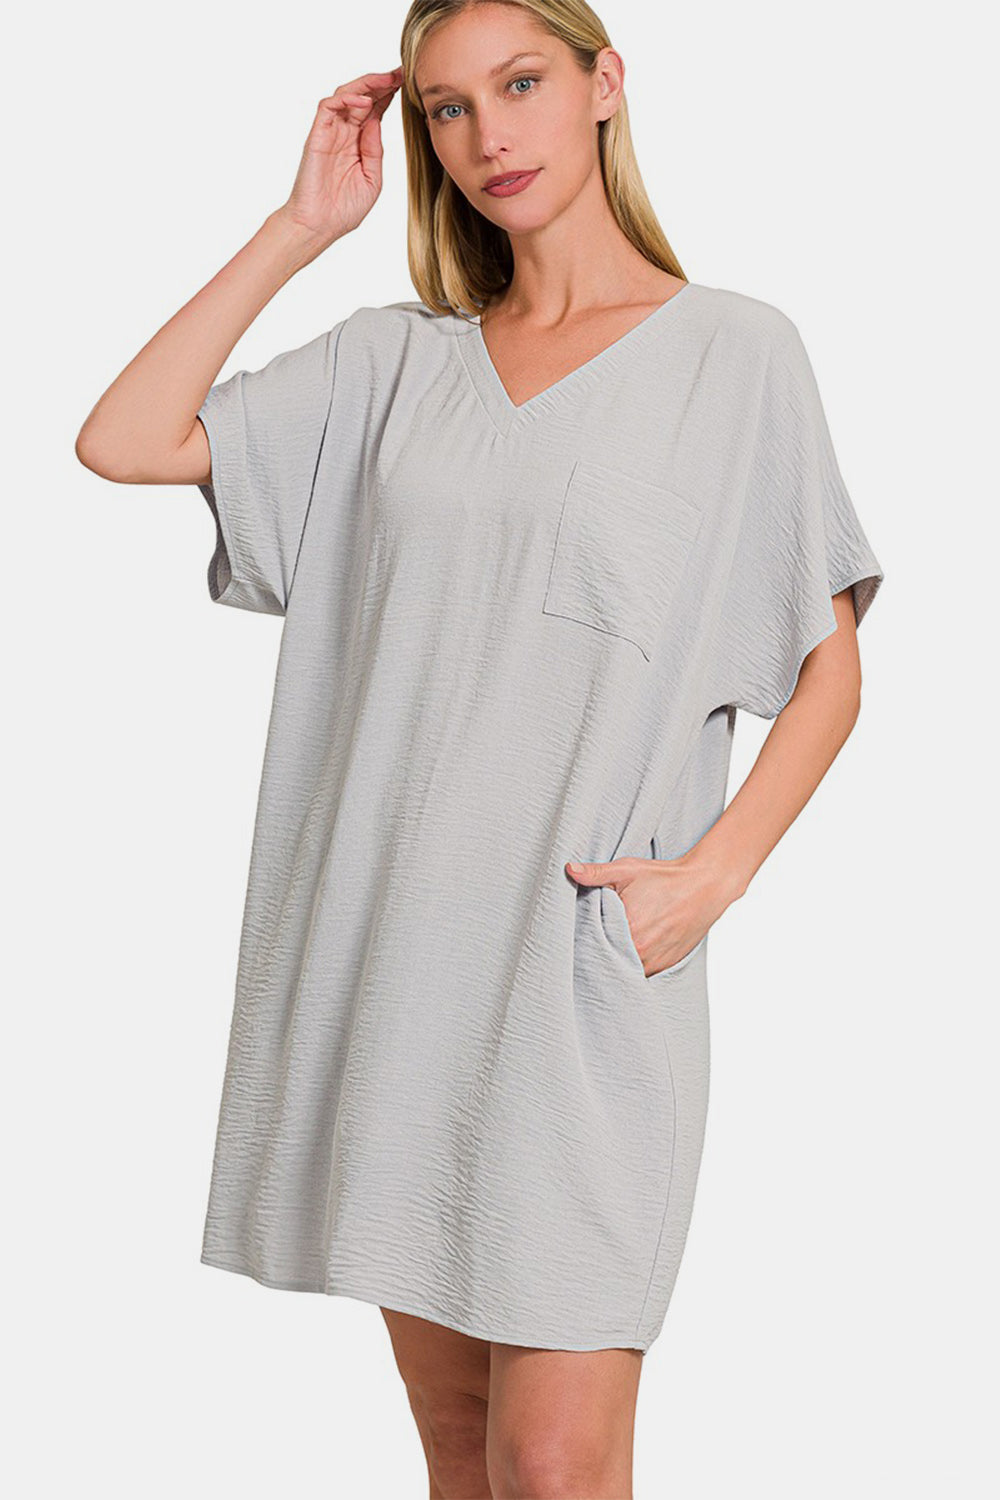 Woven Airflow V-Neck T-Shirt Dress With Pockets